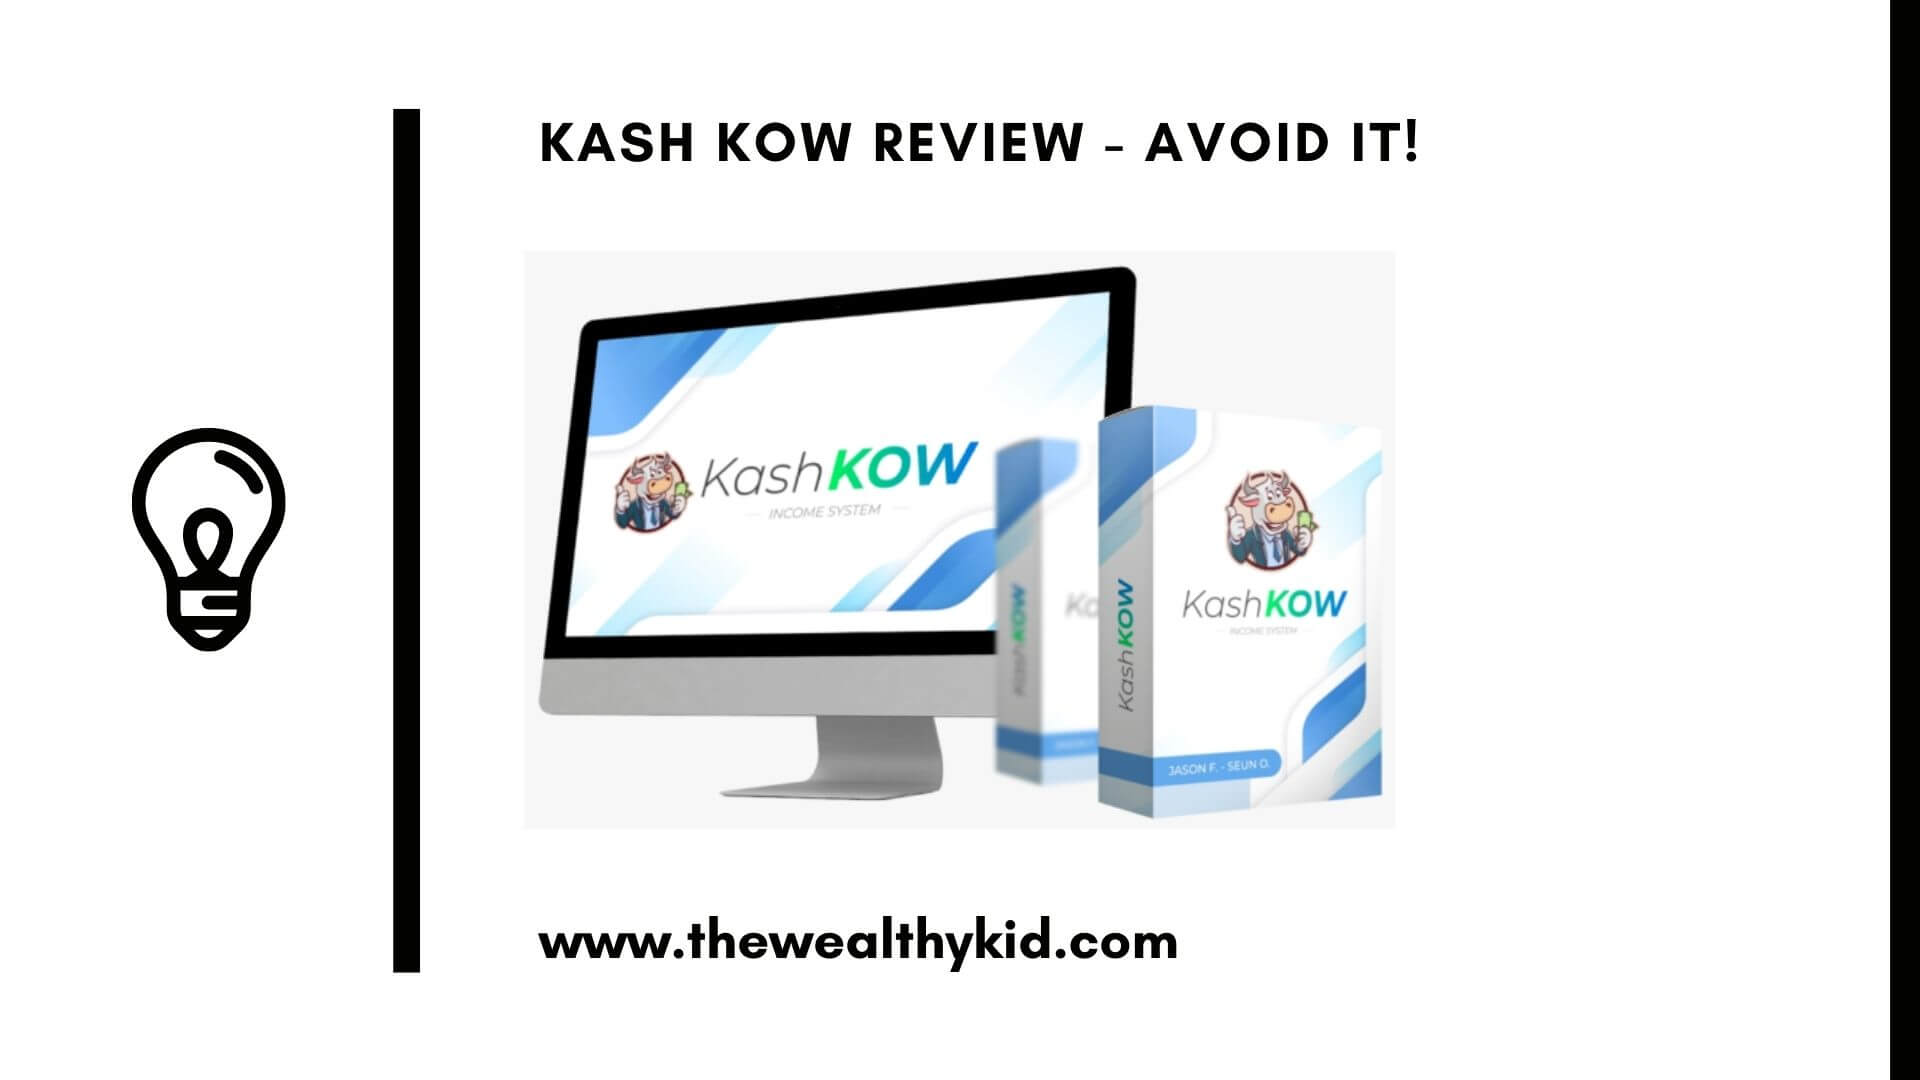 what is kash kow about